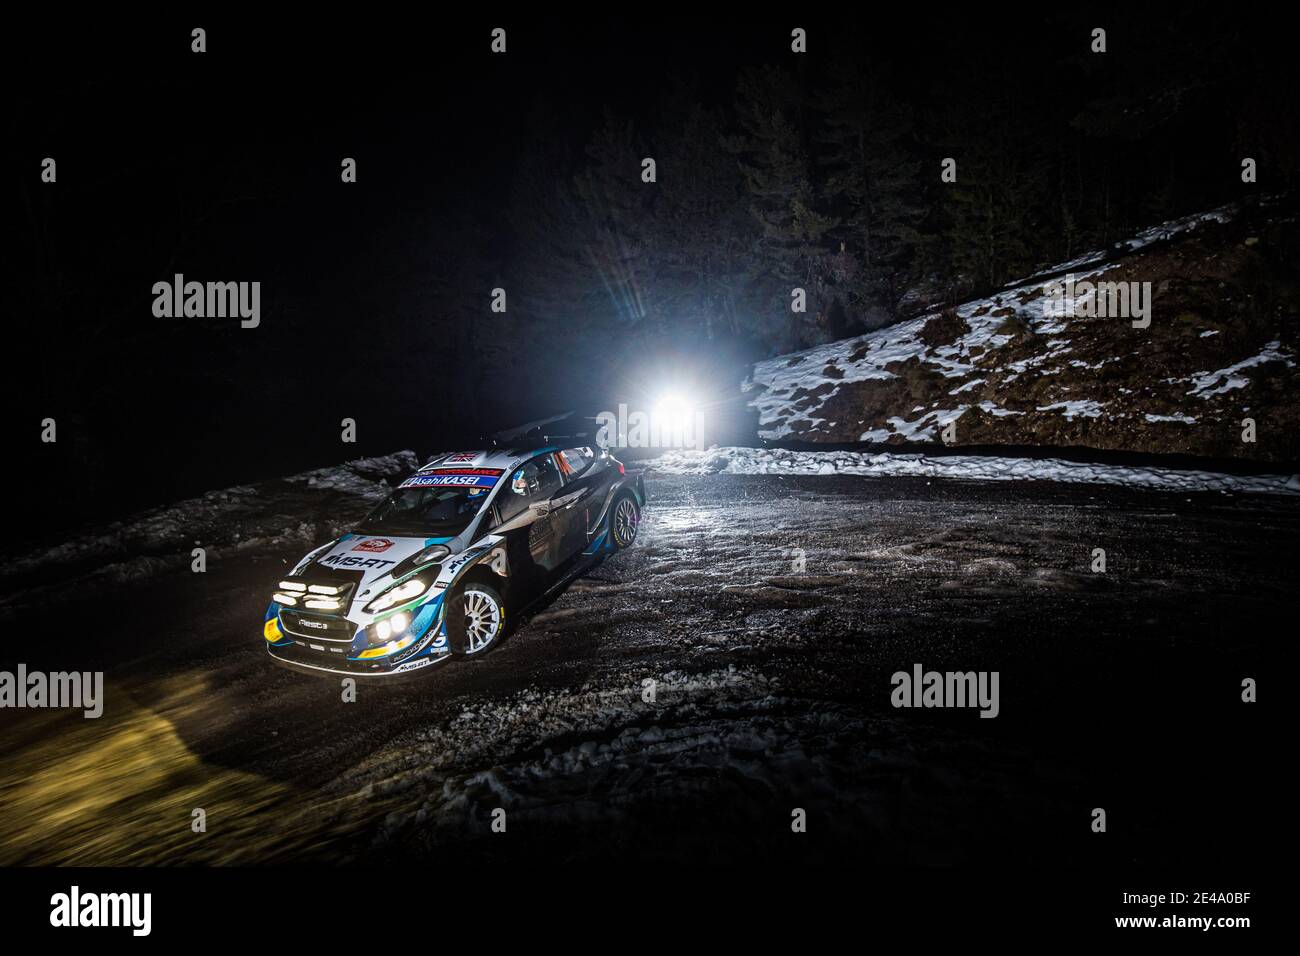 44 Gus GREENSMITH (GBR), Elliott EDMONDSON (GBR), M-SPORT FORD WORLD RALLY TEAM, FORD Fiesta WRC, action during the 2021 WRC World Rally Car Championship, Monte Carlo rally on January 20 to 24, 2021 at Monaco - Photo Bastien Roux / DPPI / LM Stock Photo